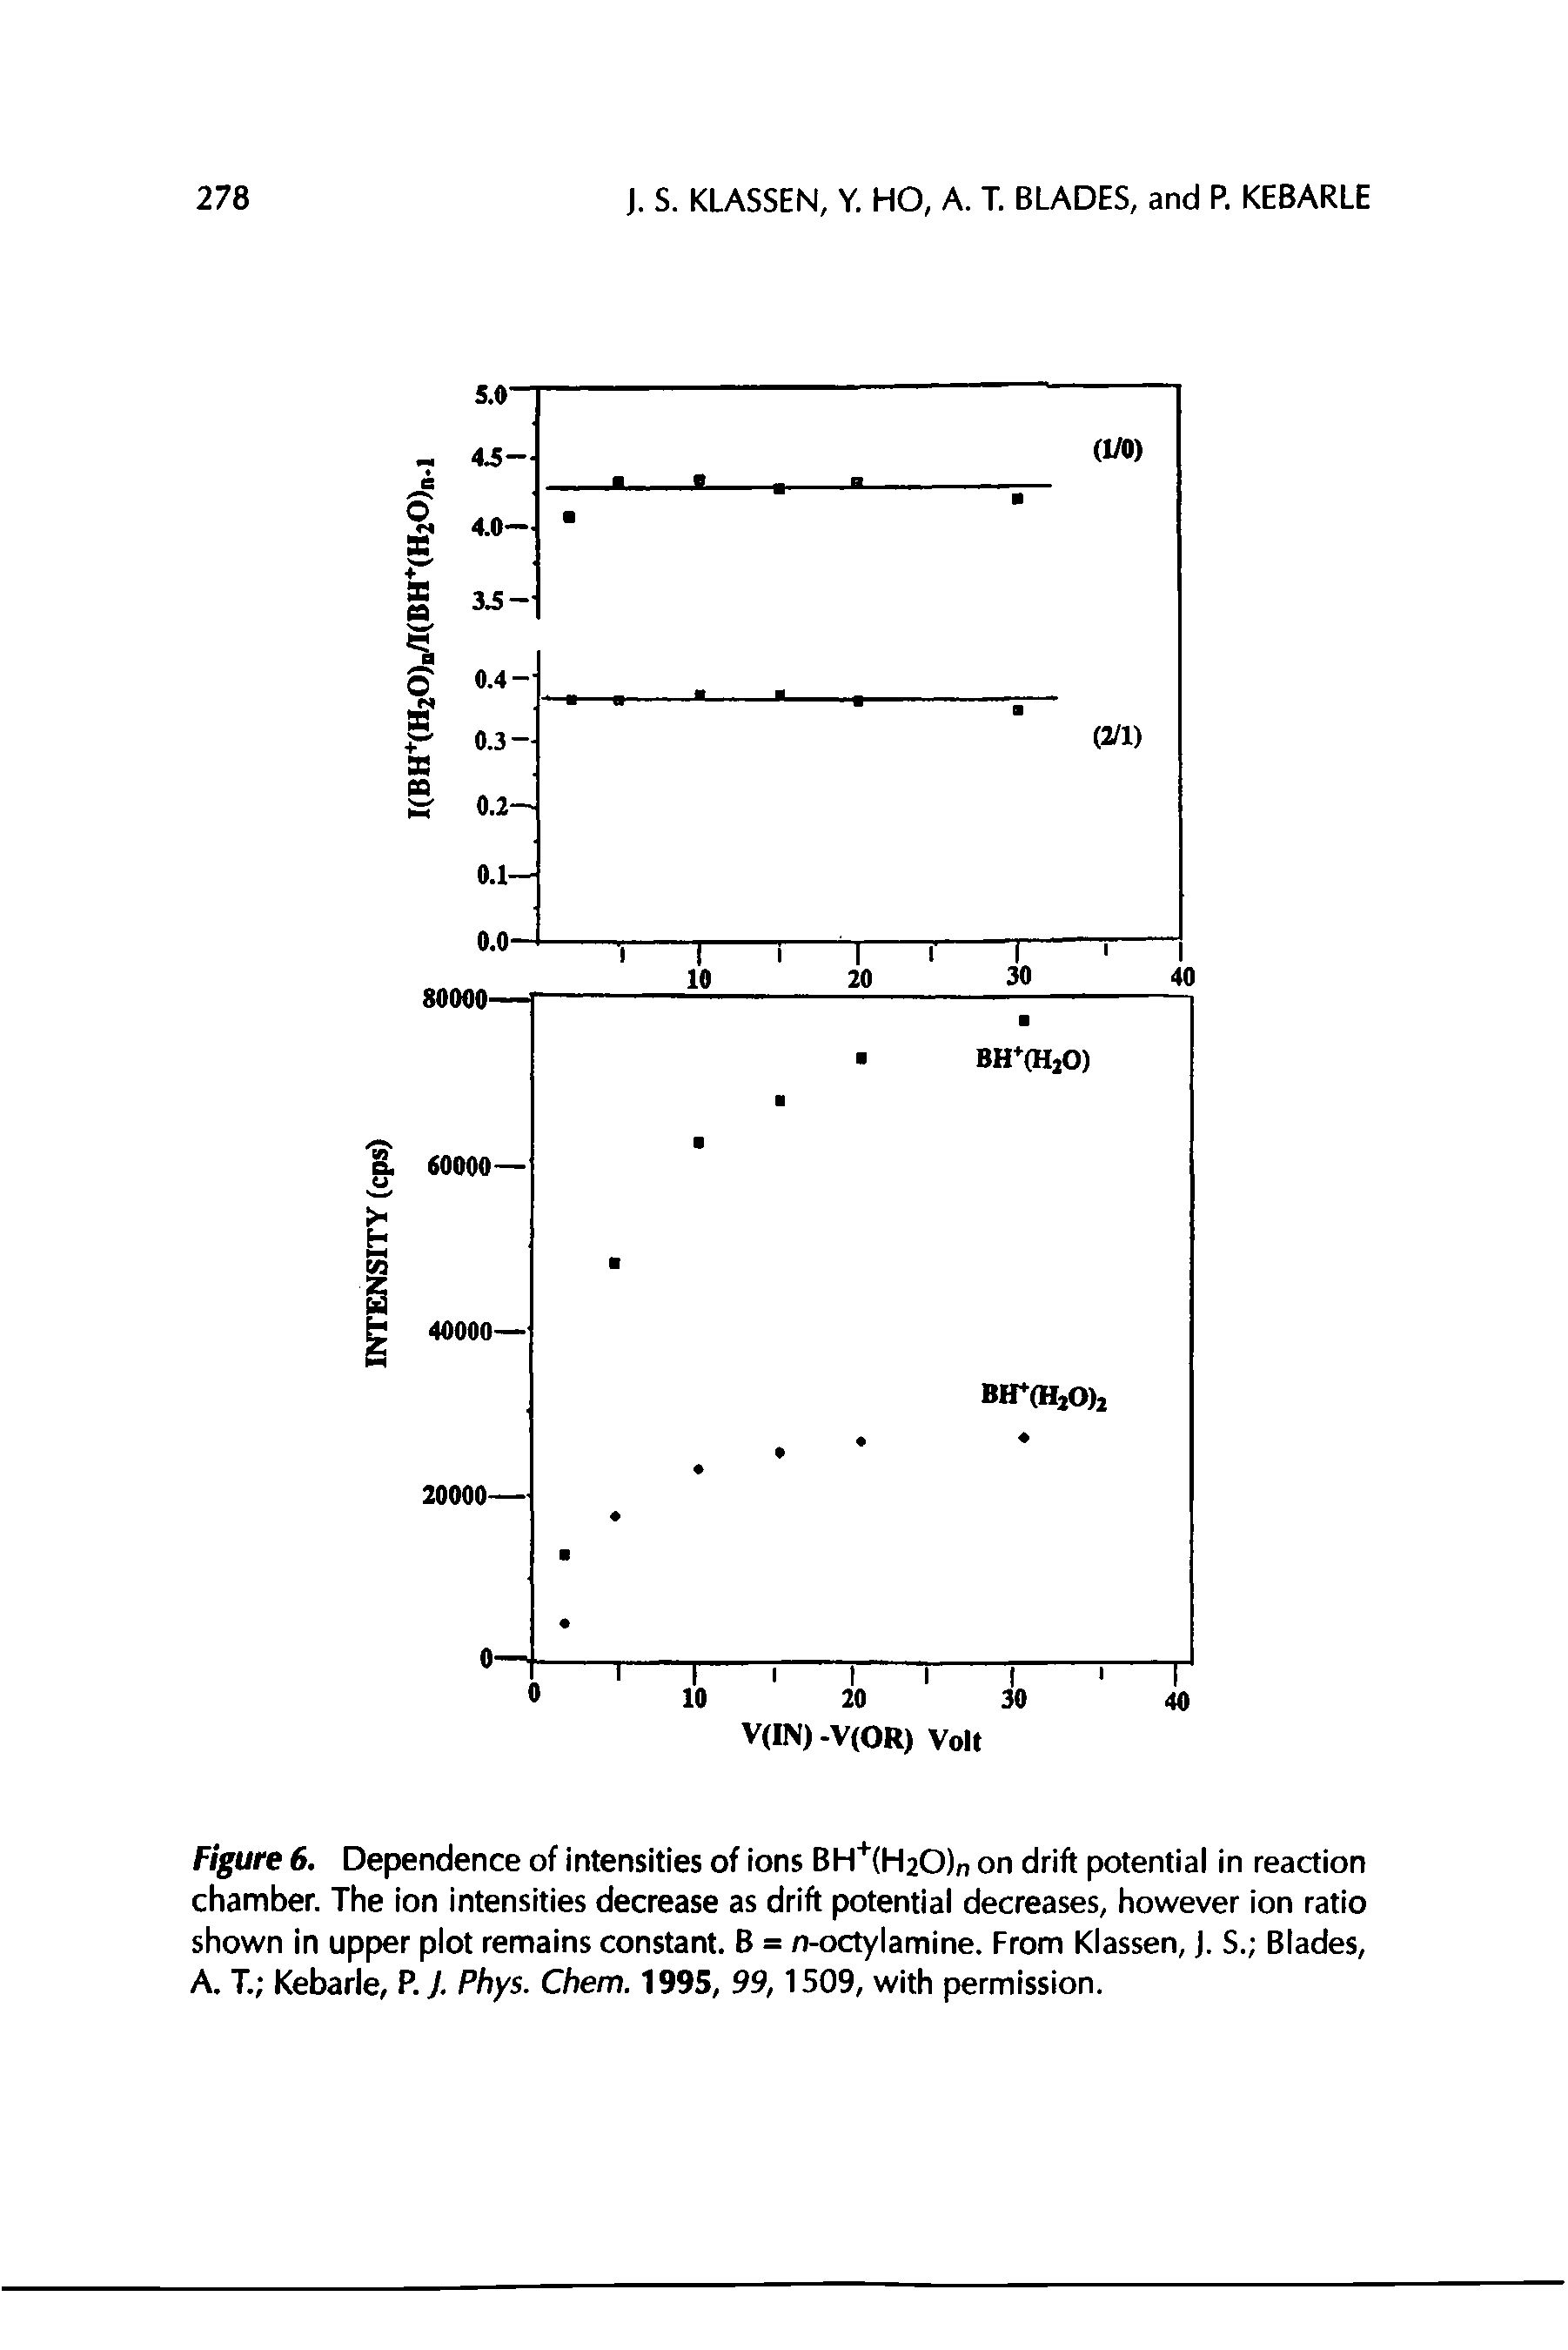 Figure 6. Dependence of intensities of ions BH+(H20)n on drift potential in reaction chamber. The ion intensities decrease as drift potential decreases, however ion ratio shown in upper plot remains constant. B = n-octylamine. From Klassen, J. S. Blades, A. T. Kebarle, P. J. Phys. Chem. 1995, 99,1509, with permission.